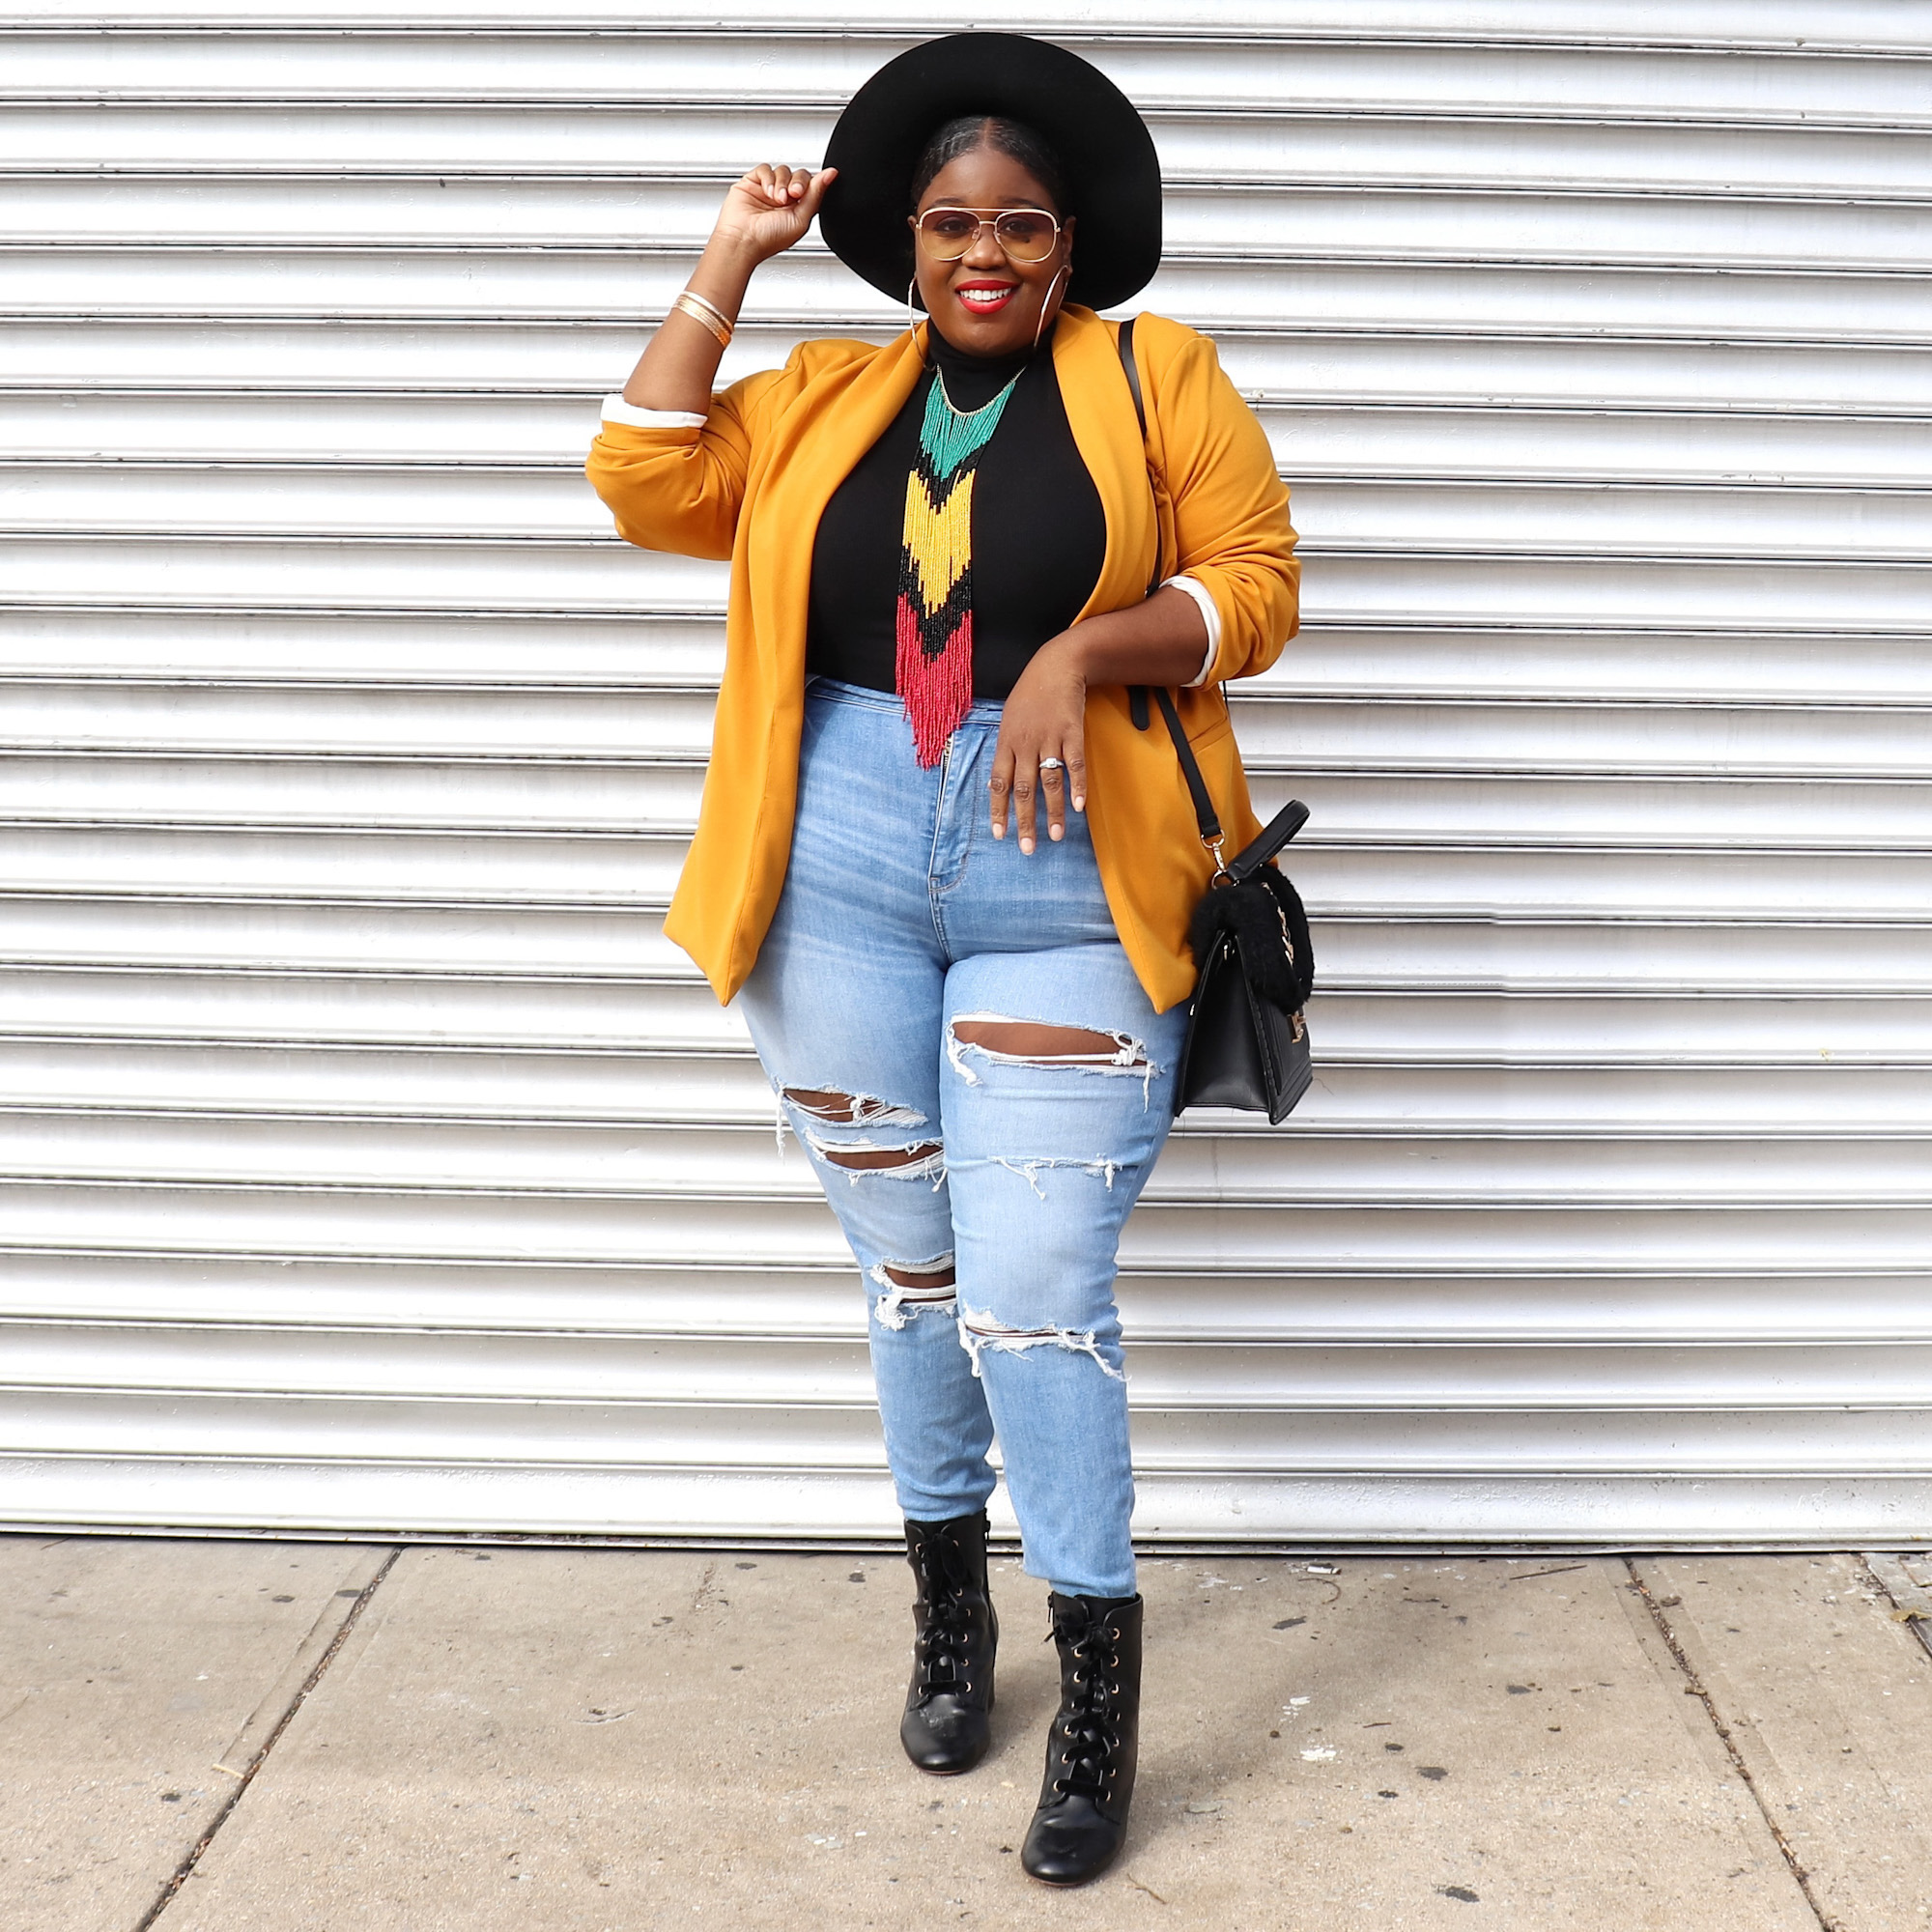 Can Plus-Size Women Wear Bright Colors In The Fall?